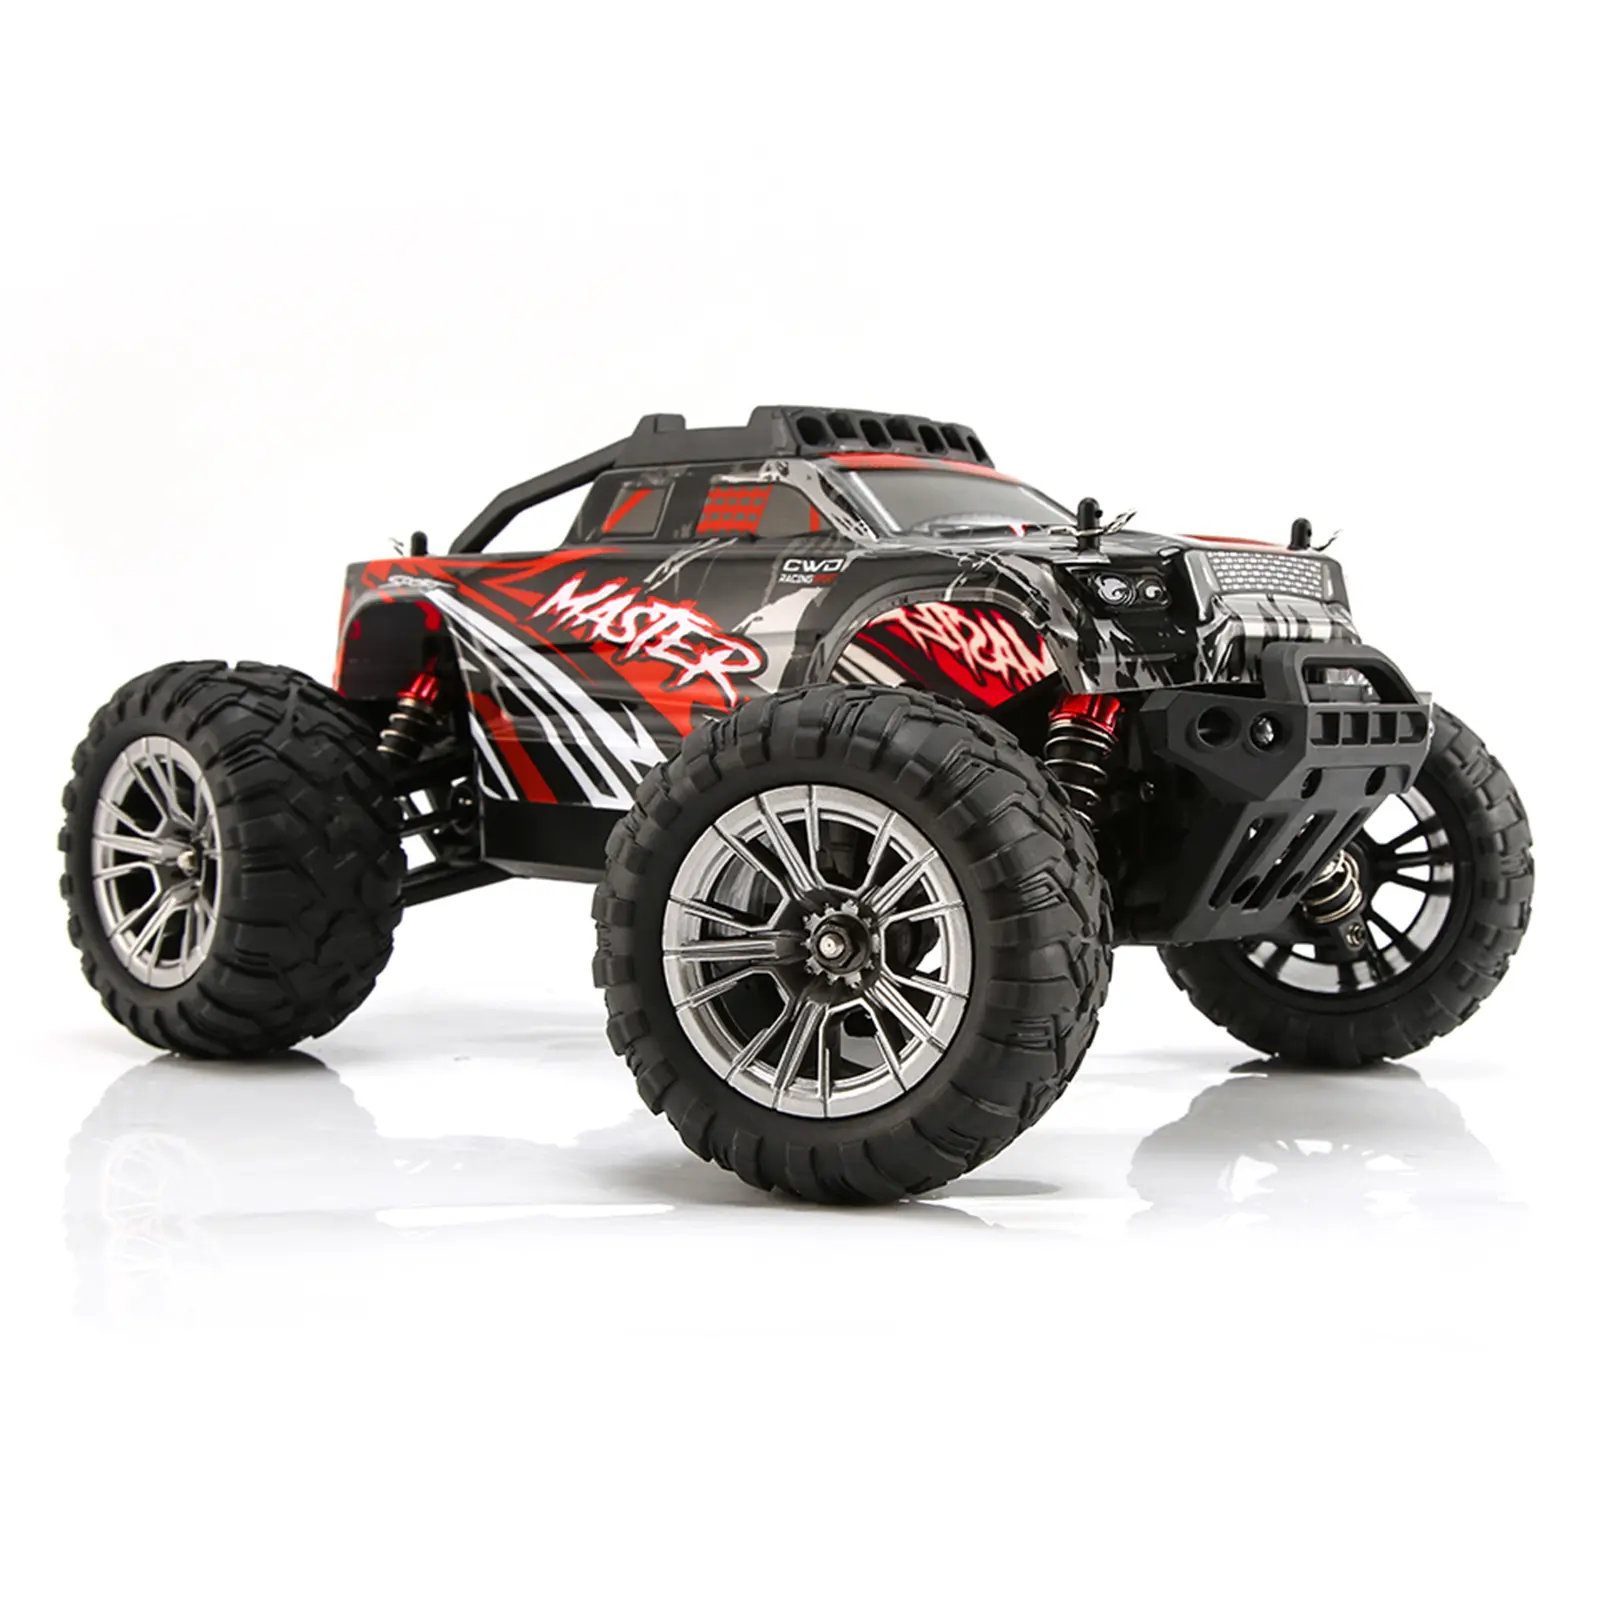 Aimiqi KF11 1:16 2.4Ghz 4WD High Speed Off-Road Vehicle Racing Brushed Electric Car Climbing Vehicle Remote Control RC Car